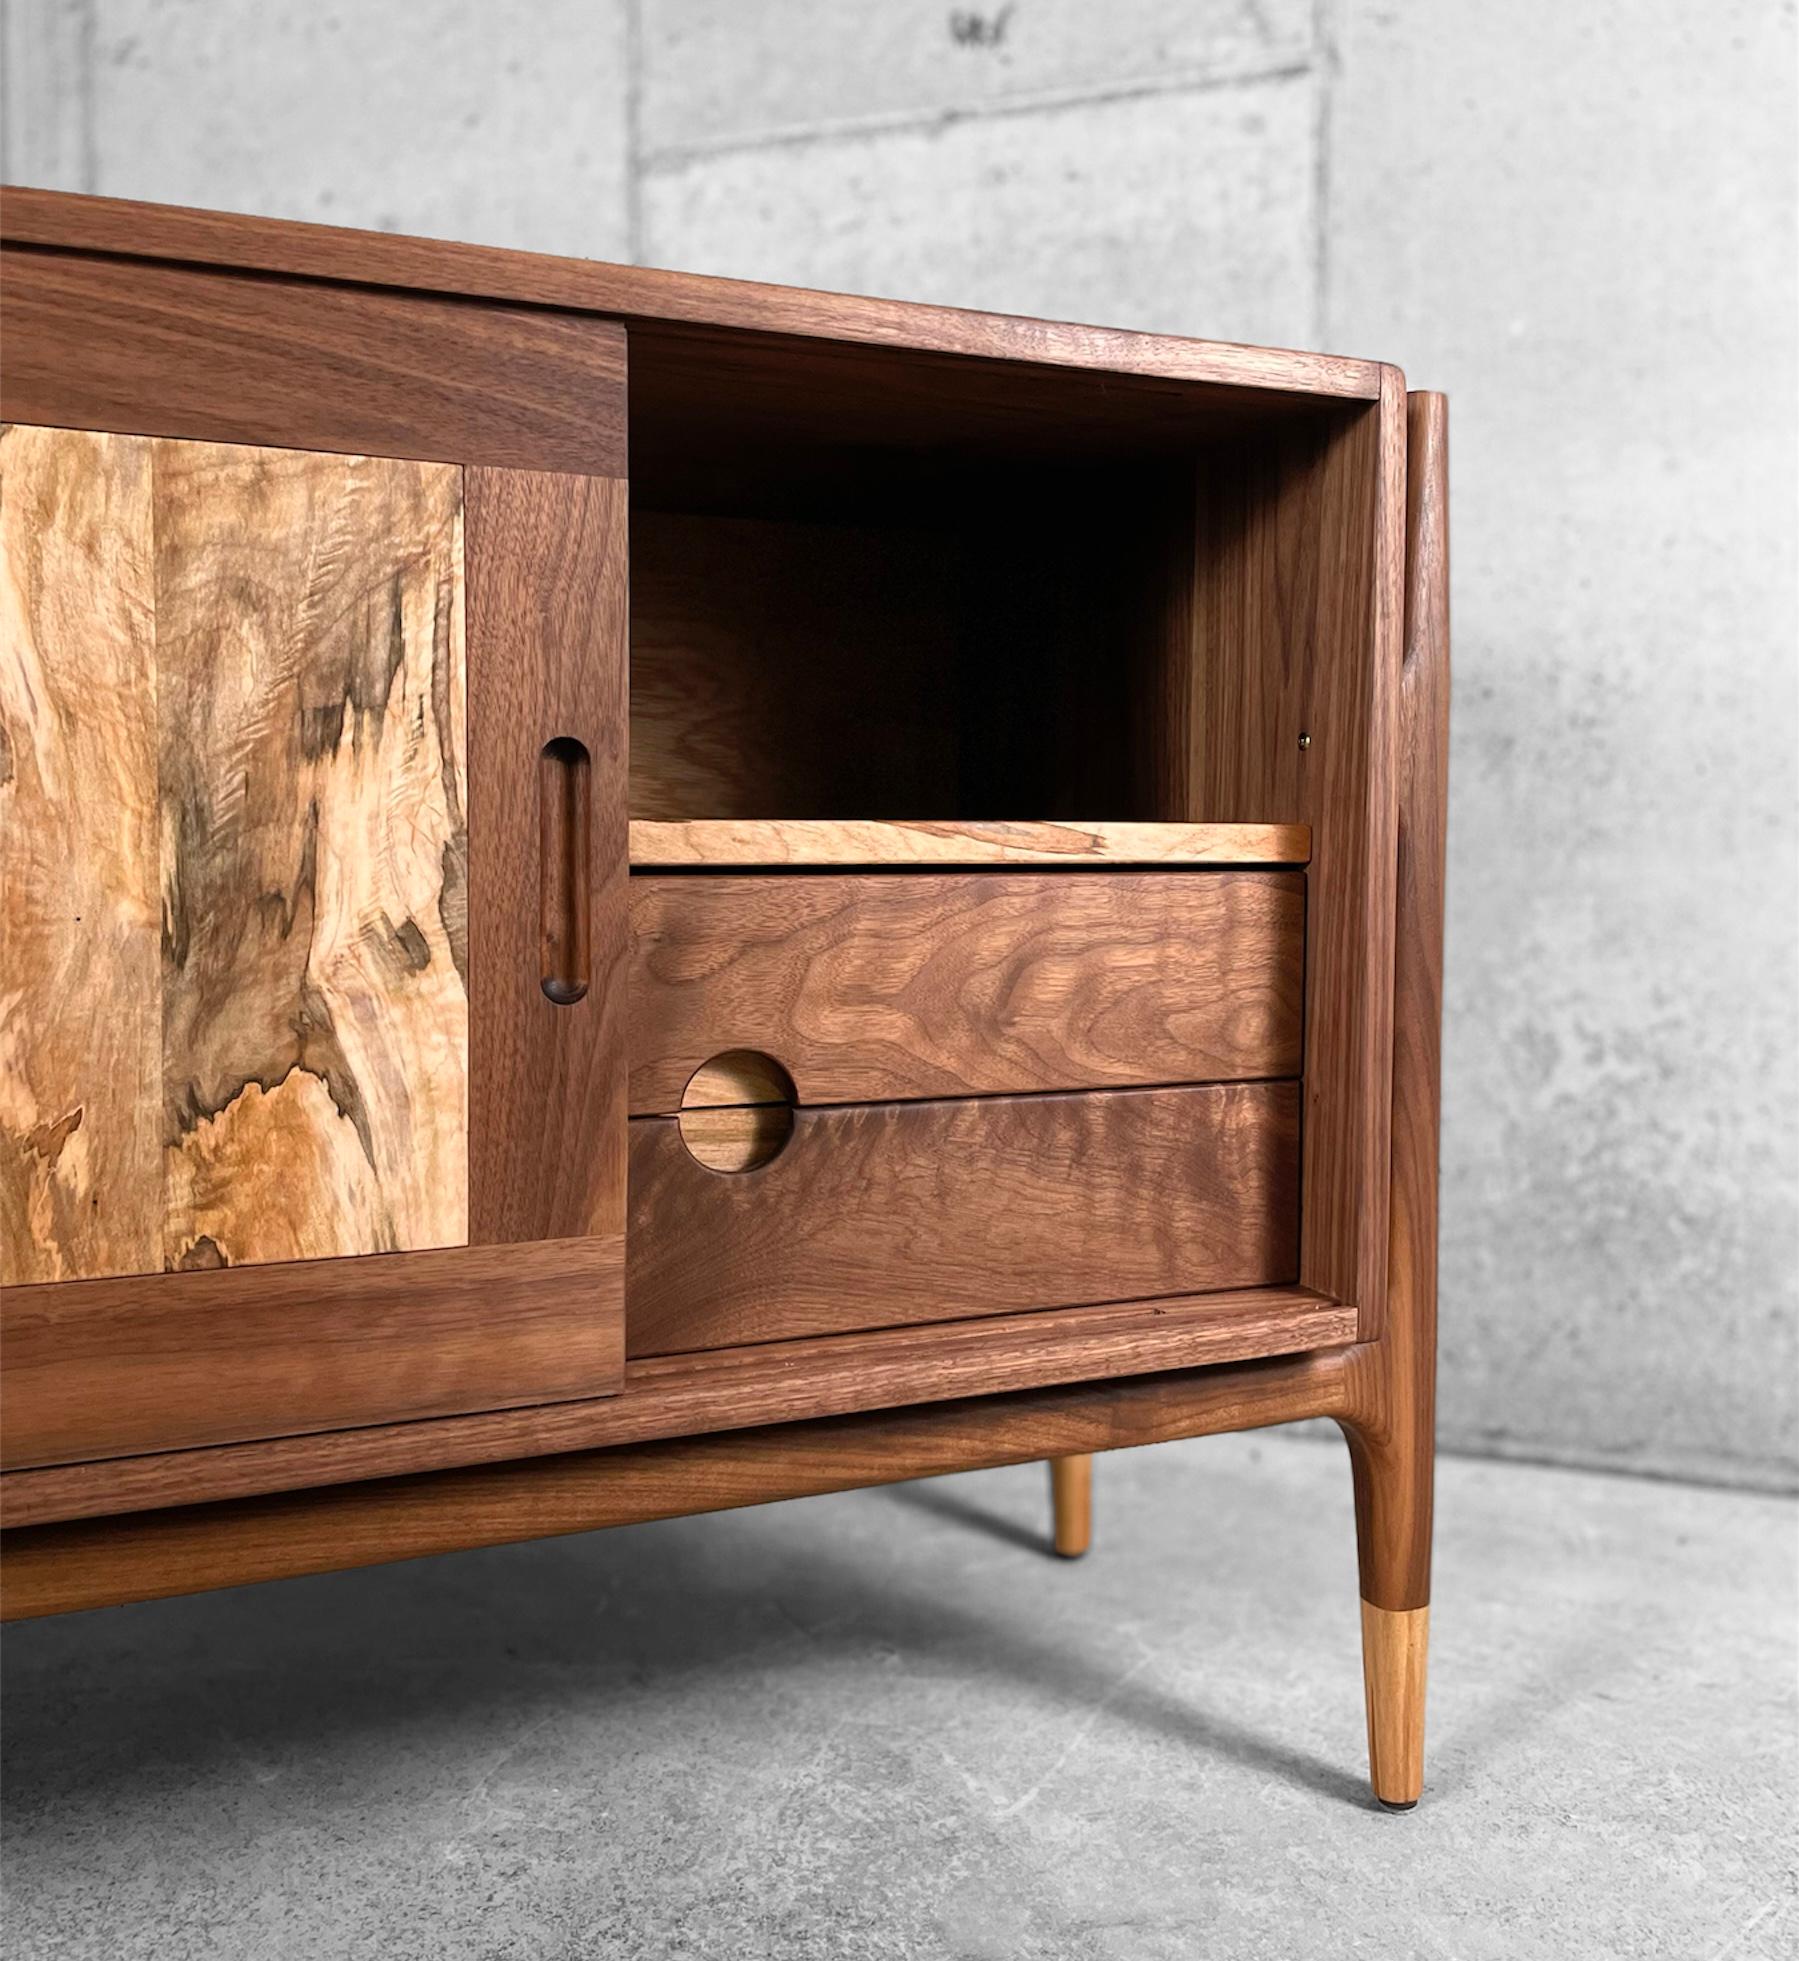 Sideboard No.2 is a highly detailed and functional cabinet featuring traditional joinery that has been lost in today’s fast built, throw away furniture. Although there have been multiple made, no two are the same and are unique in their own way.